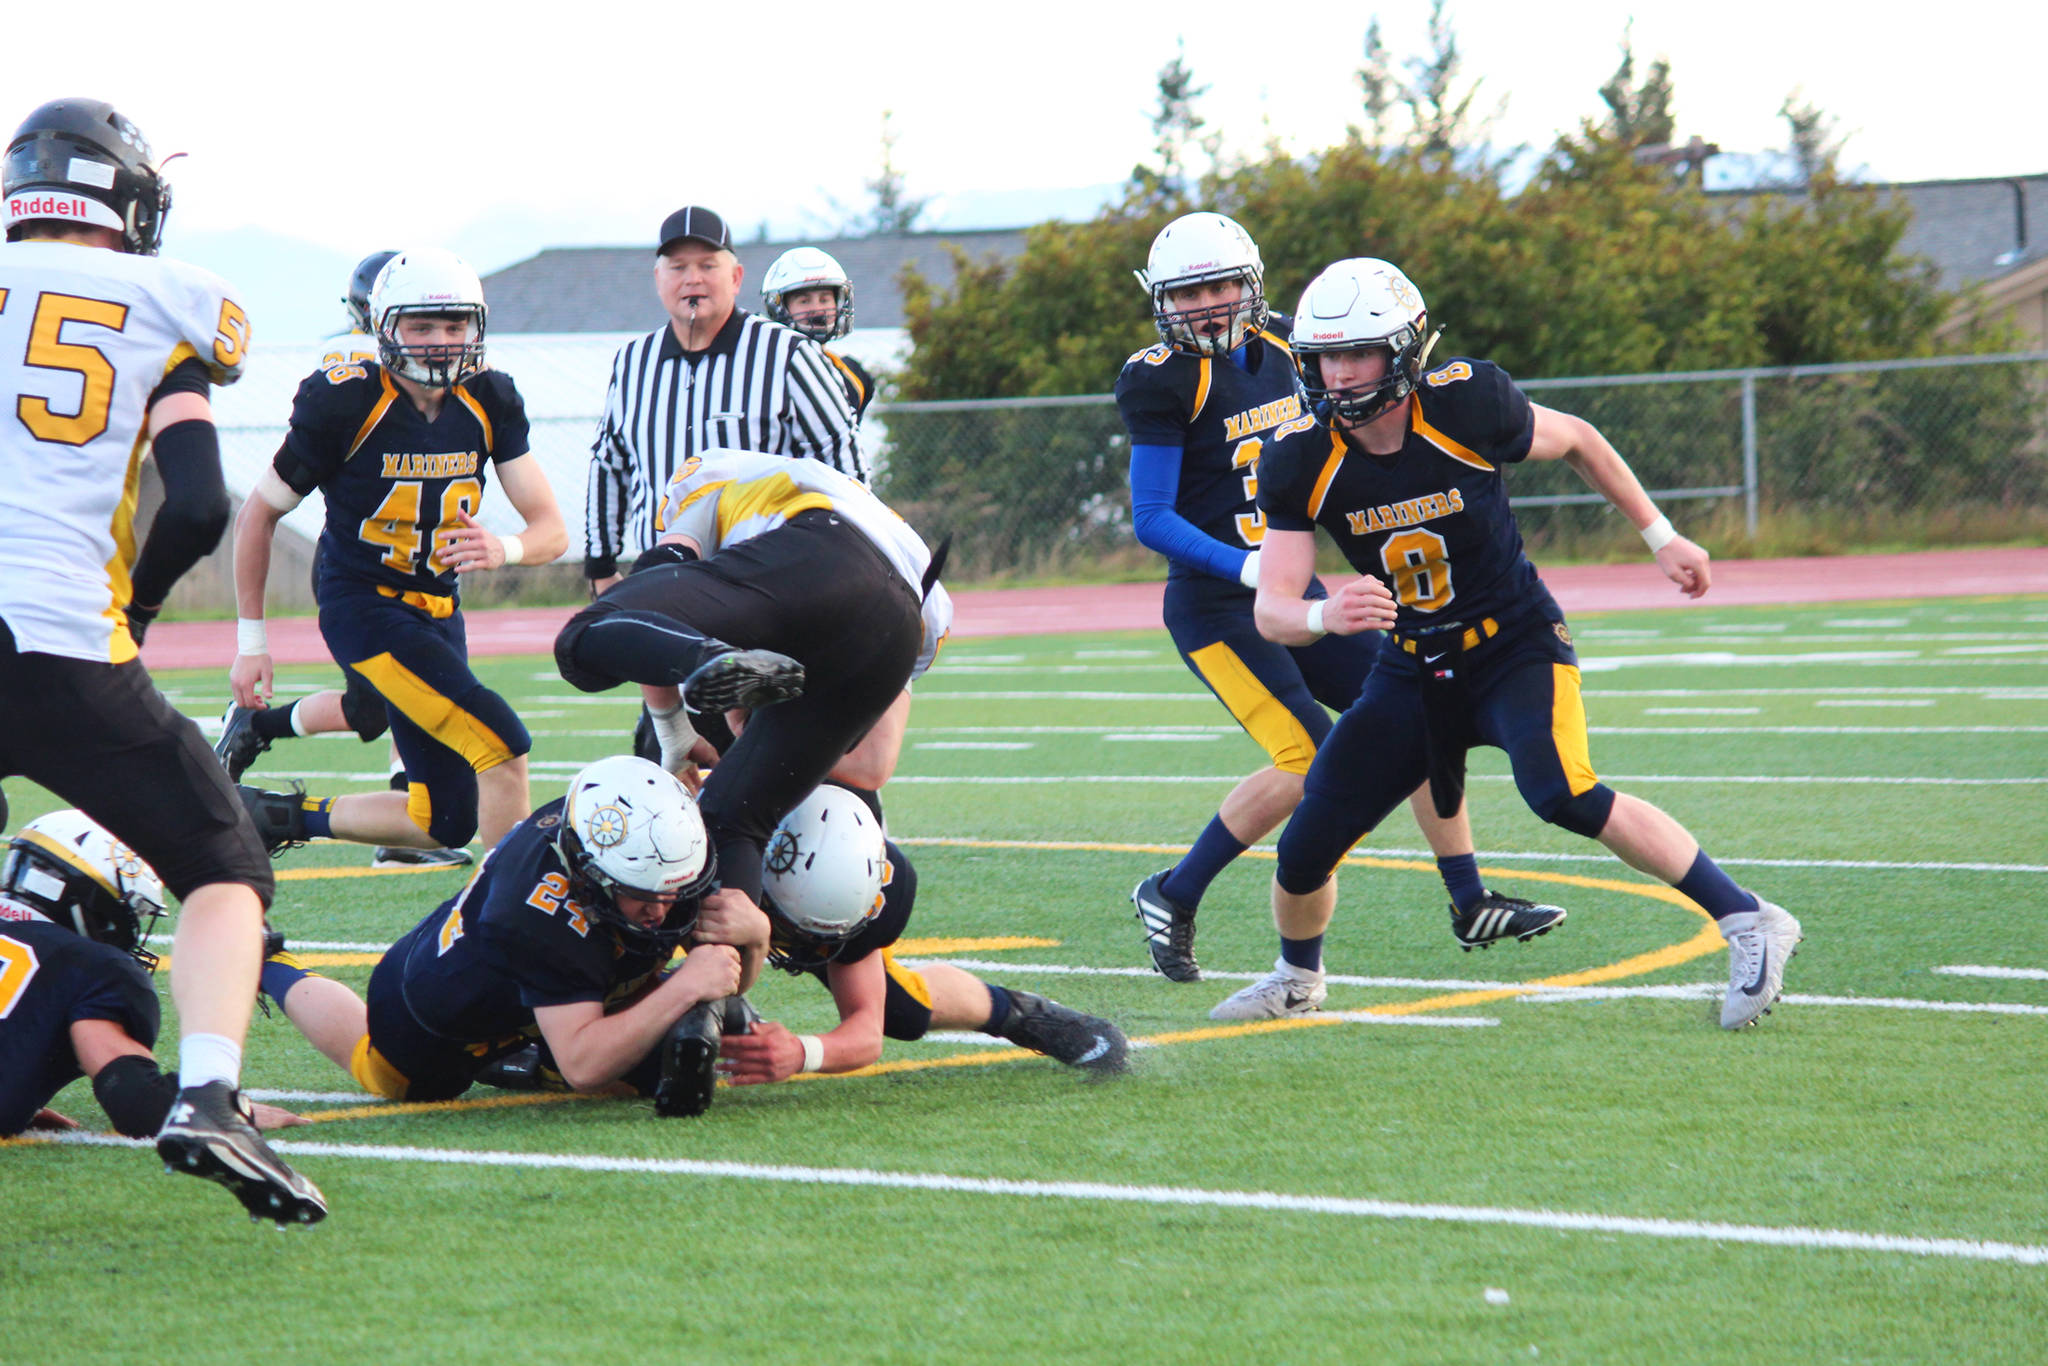 Two Homer Mariner varsity football team members grab onto the leg of David Sanarov, a senior player for the Head of the Bay Cougars, as he runs the ball during their Friday, Sept. 2017 game at the Mariner field in Homer, Alaska. Homer came out on top 53-0. (Photo by Megan Pacer/Homer News)